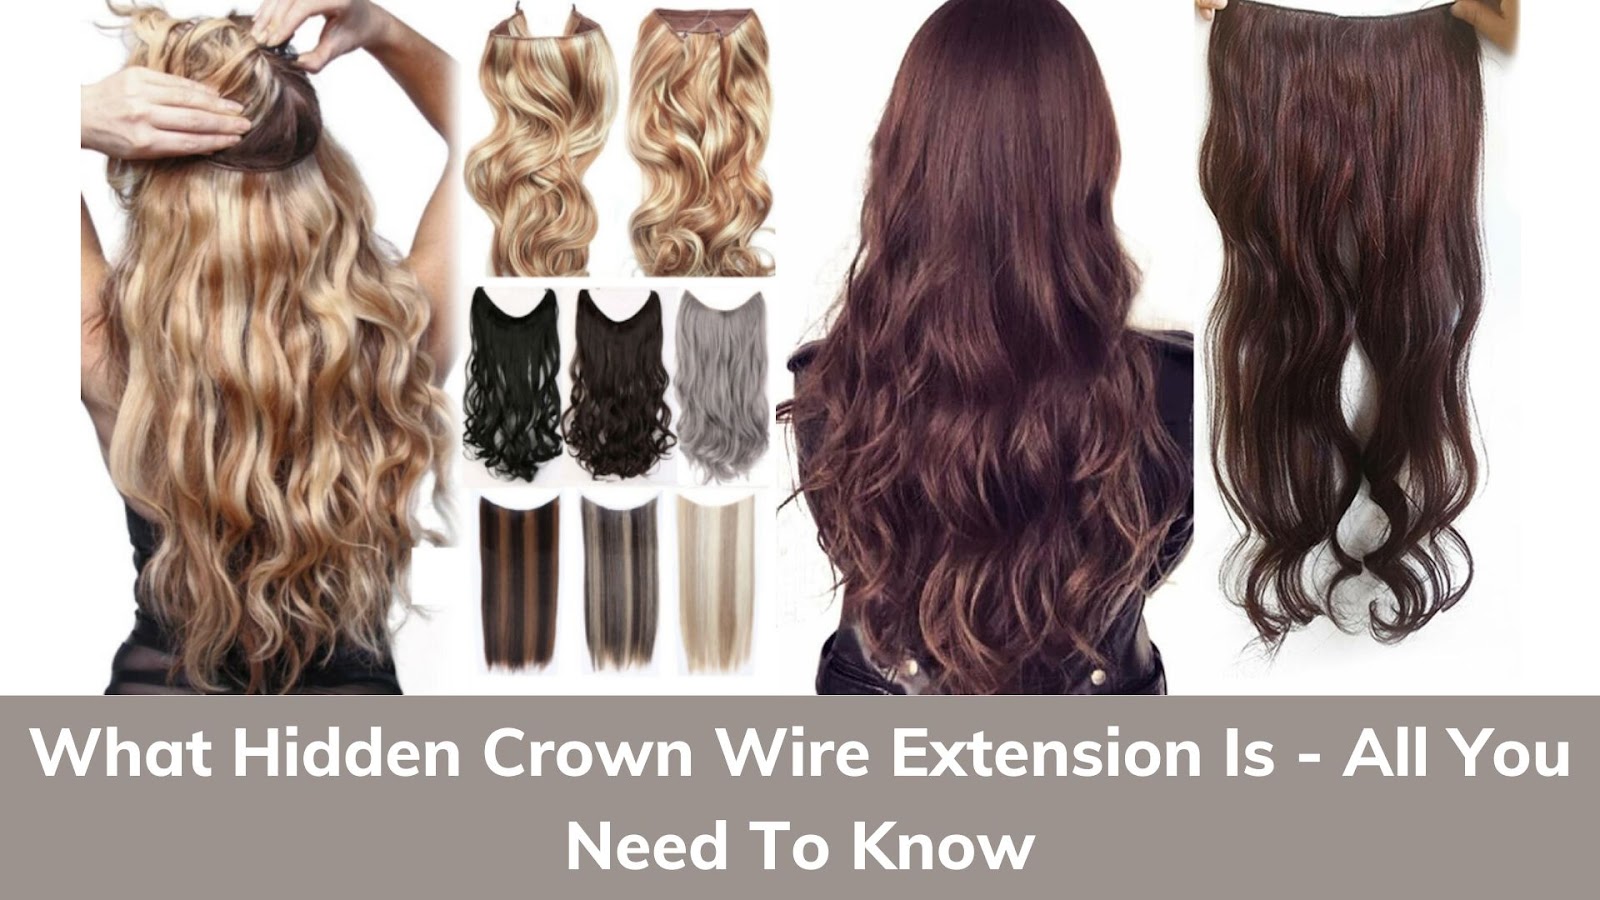 What Hidden Crown Wire Extension Is - All You Need To Know